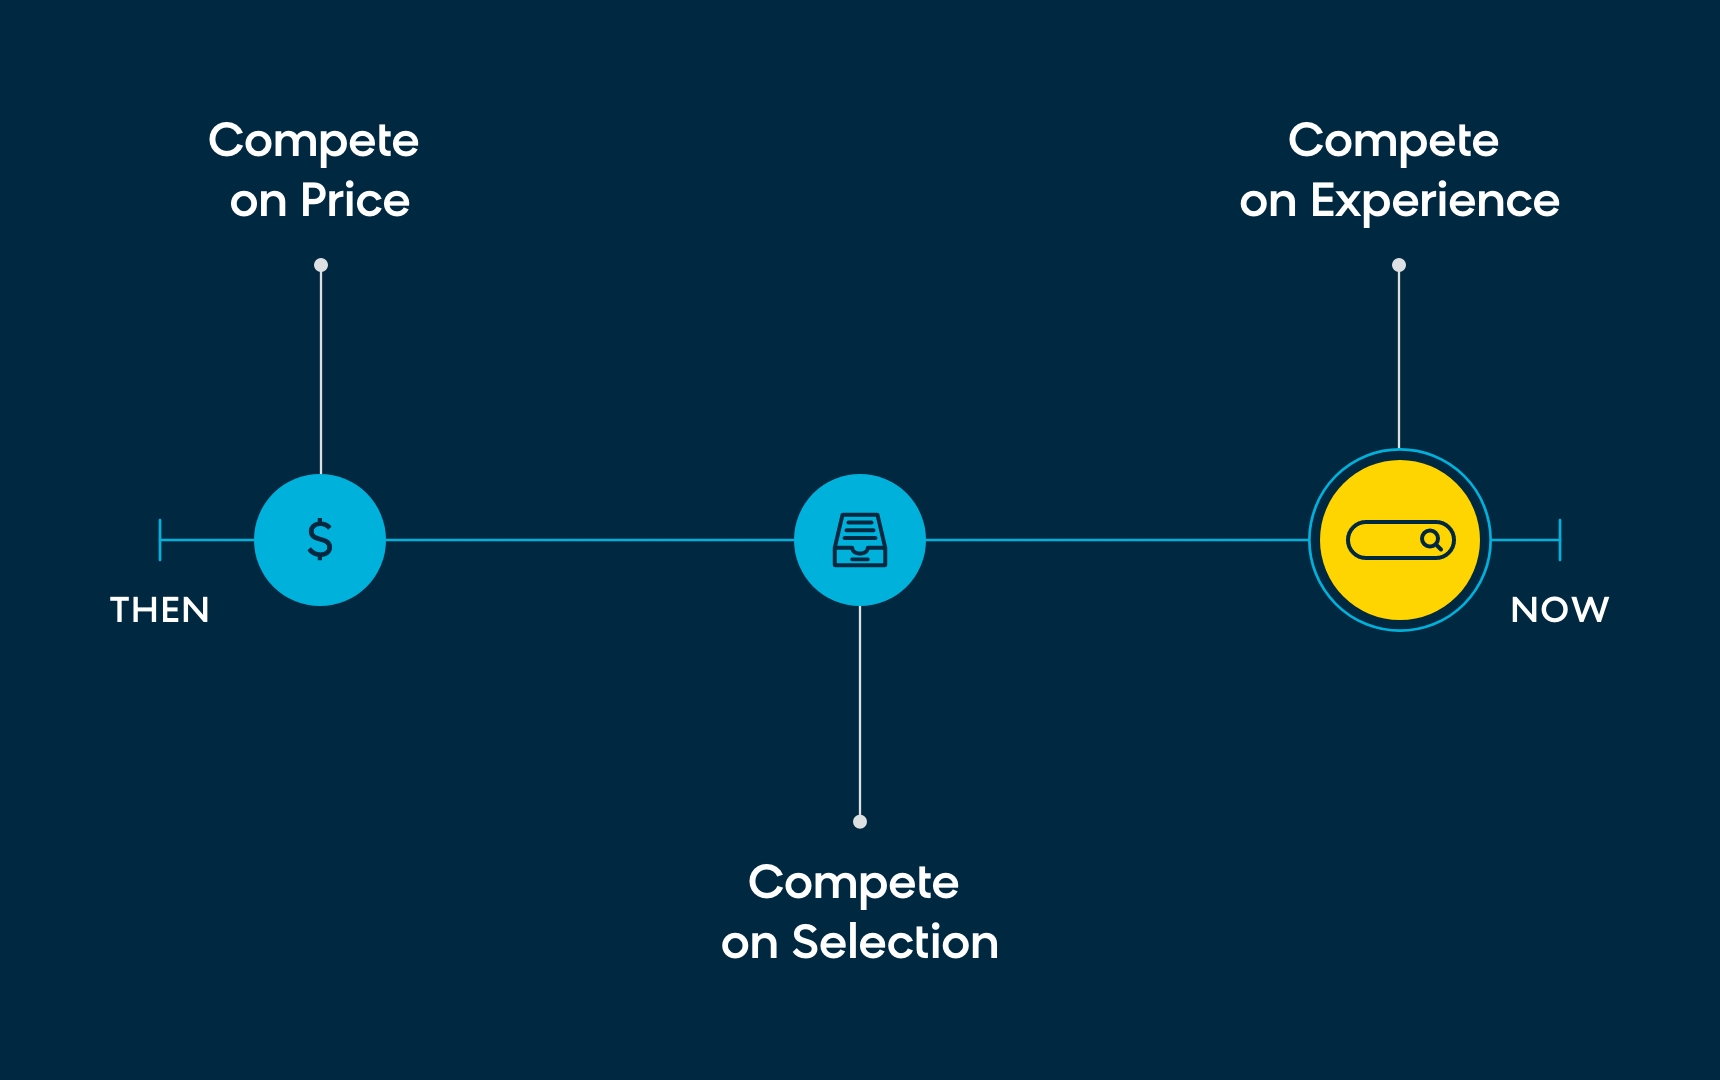 Three Phases of E-Commerce - Compete on Price, Compete on Selection, Compete on Experience